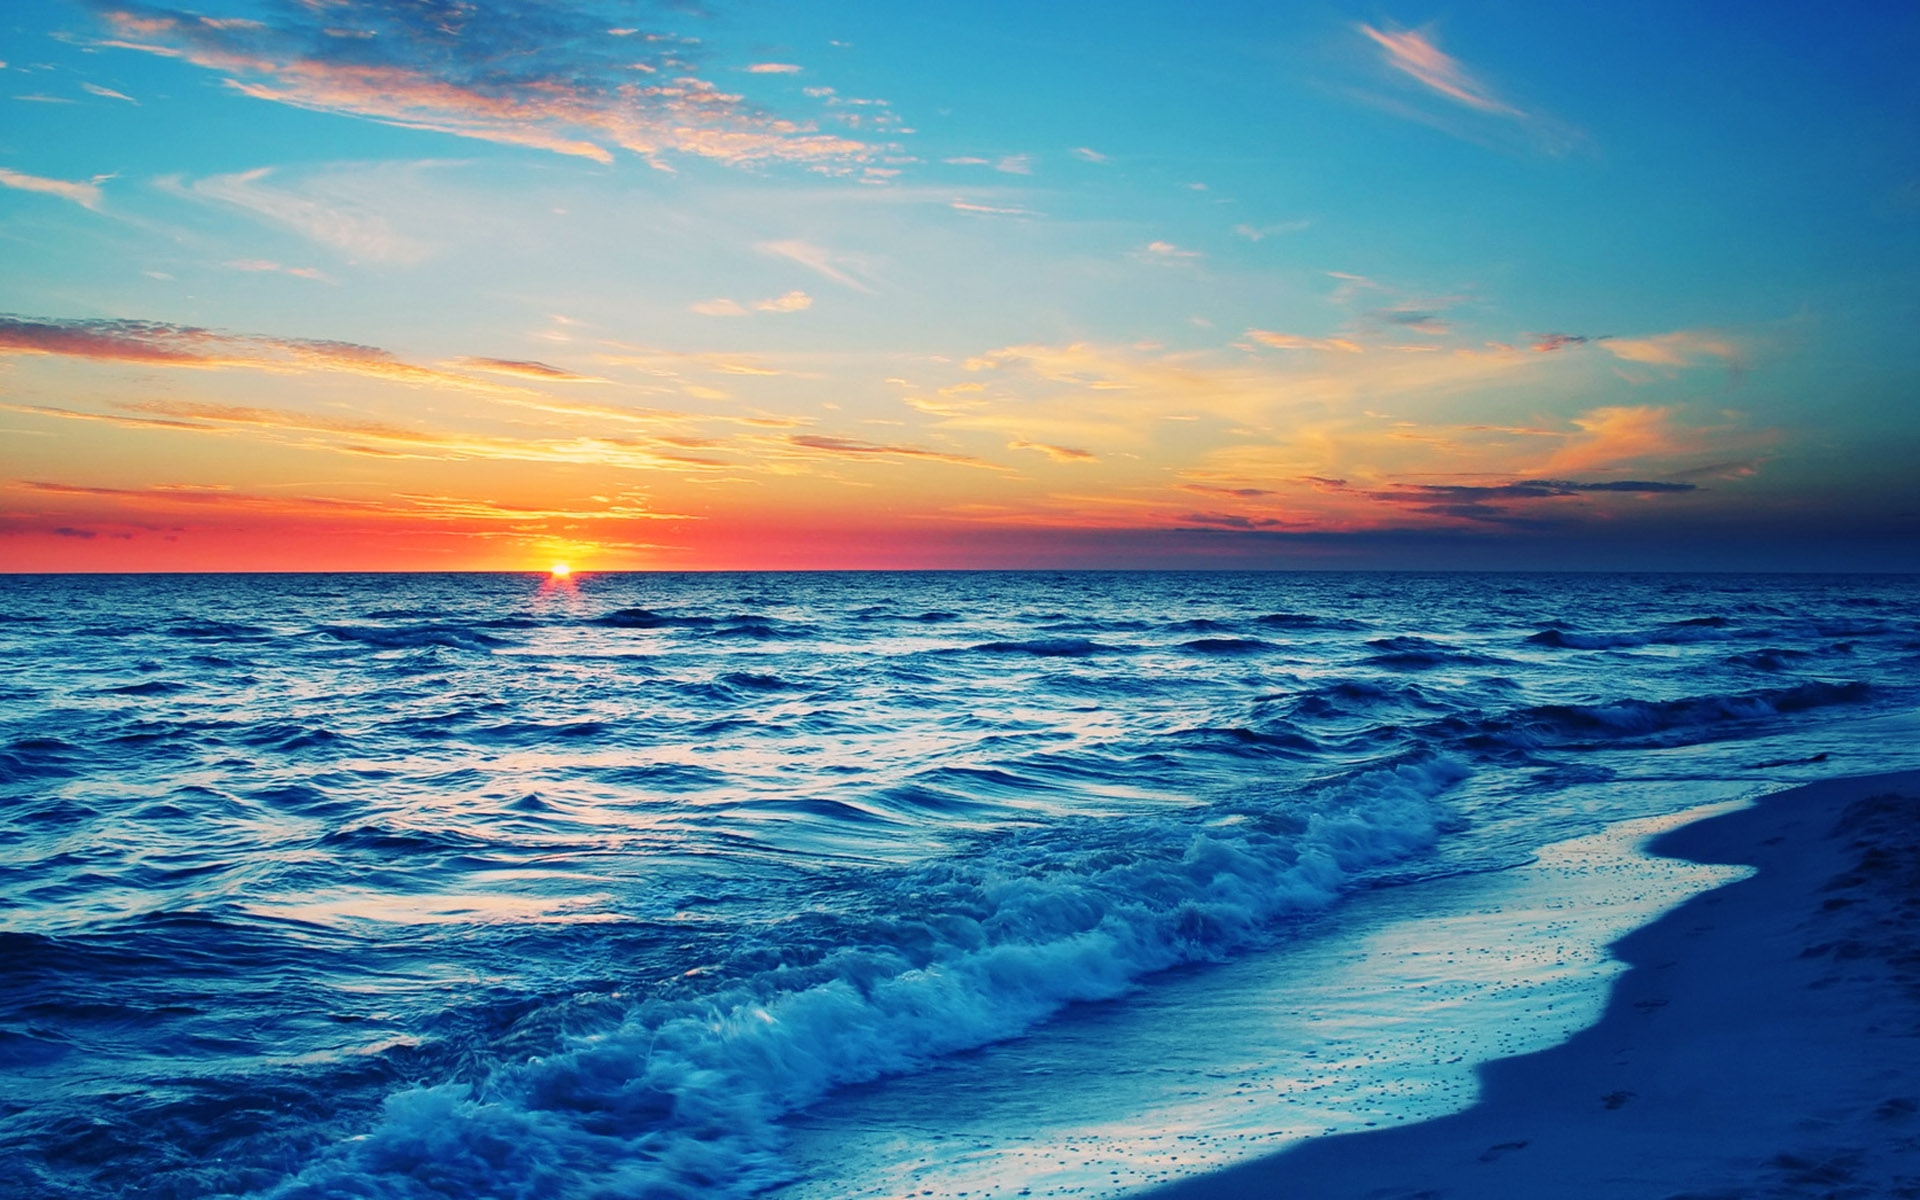 Free Download Most Beautiful Ocean Wallpapers 19x10 For Your Desktop Mobile Tablet Explore 34 Beautiful Ocean Sunset Wallpaper Beautiful Ocean Sunset Wallpaper Ocean Sunset Wallpaper Ocean Sunset Wallpapers